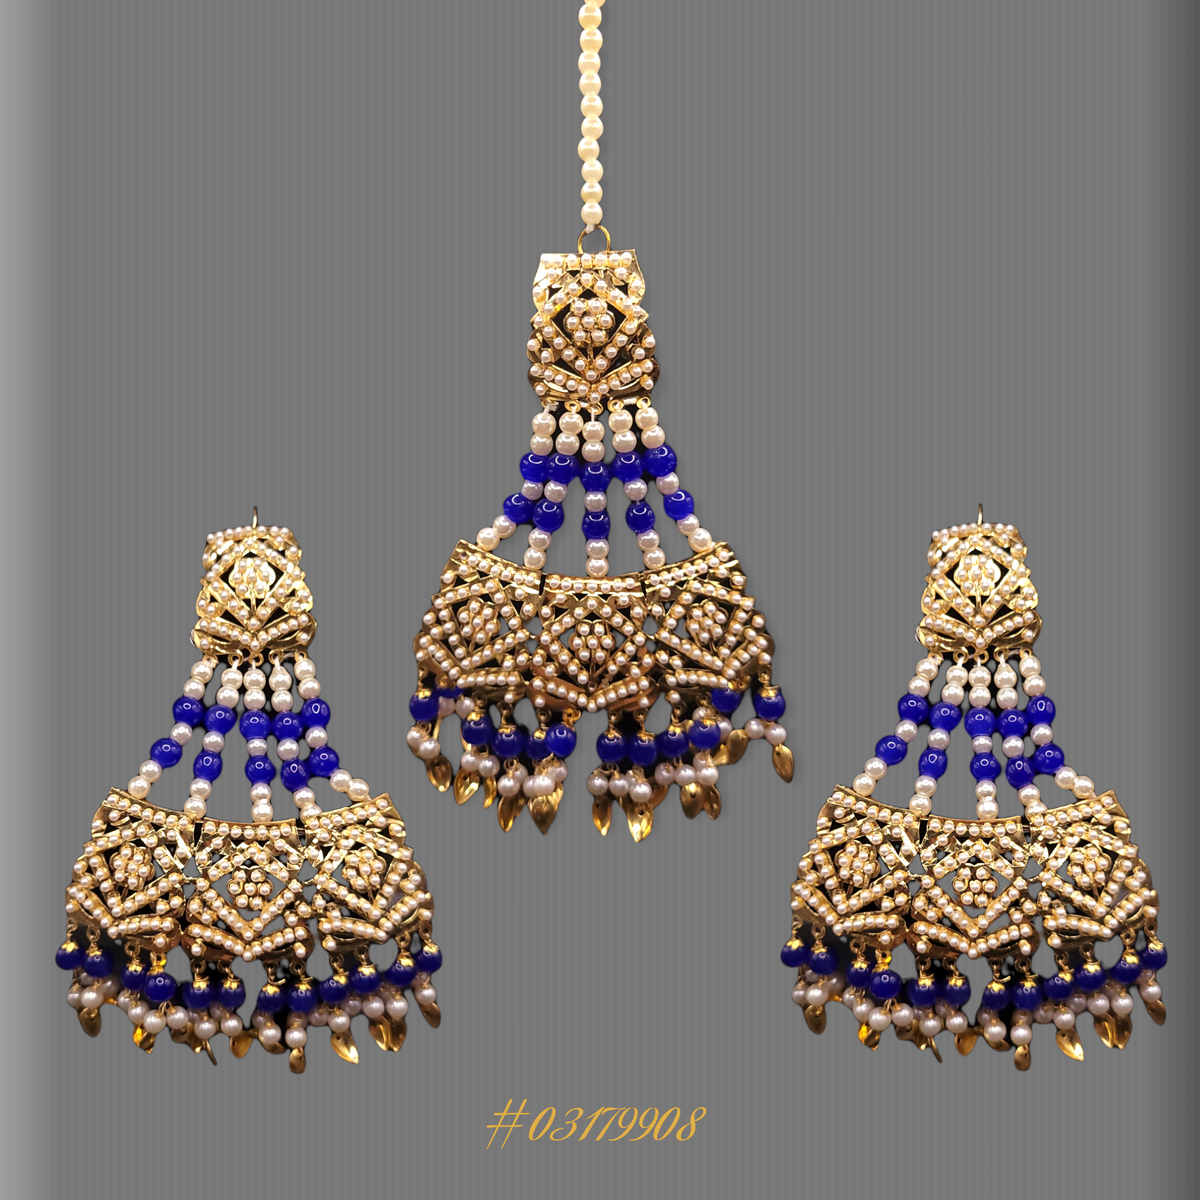 STUNNING EARRINGS WITH MAANG TIKKA (HEAD PIECE), IN BLUE, PEARL & GOLD TONE